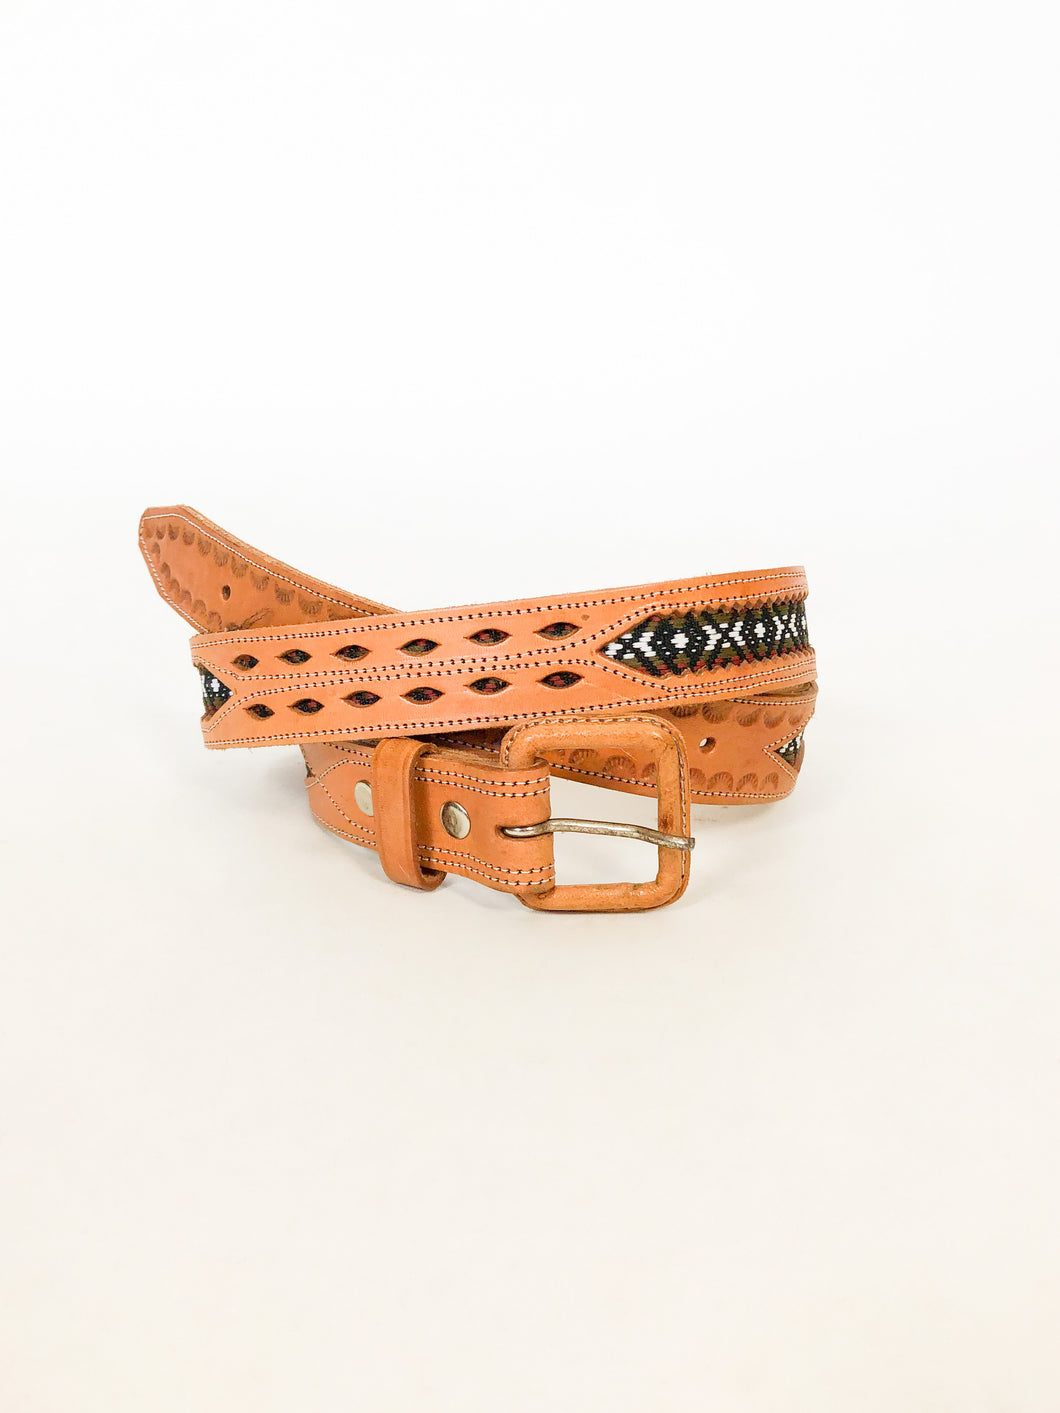 Vintage Tooled Leather and Woven Fabric Belt